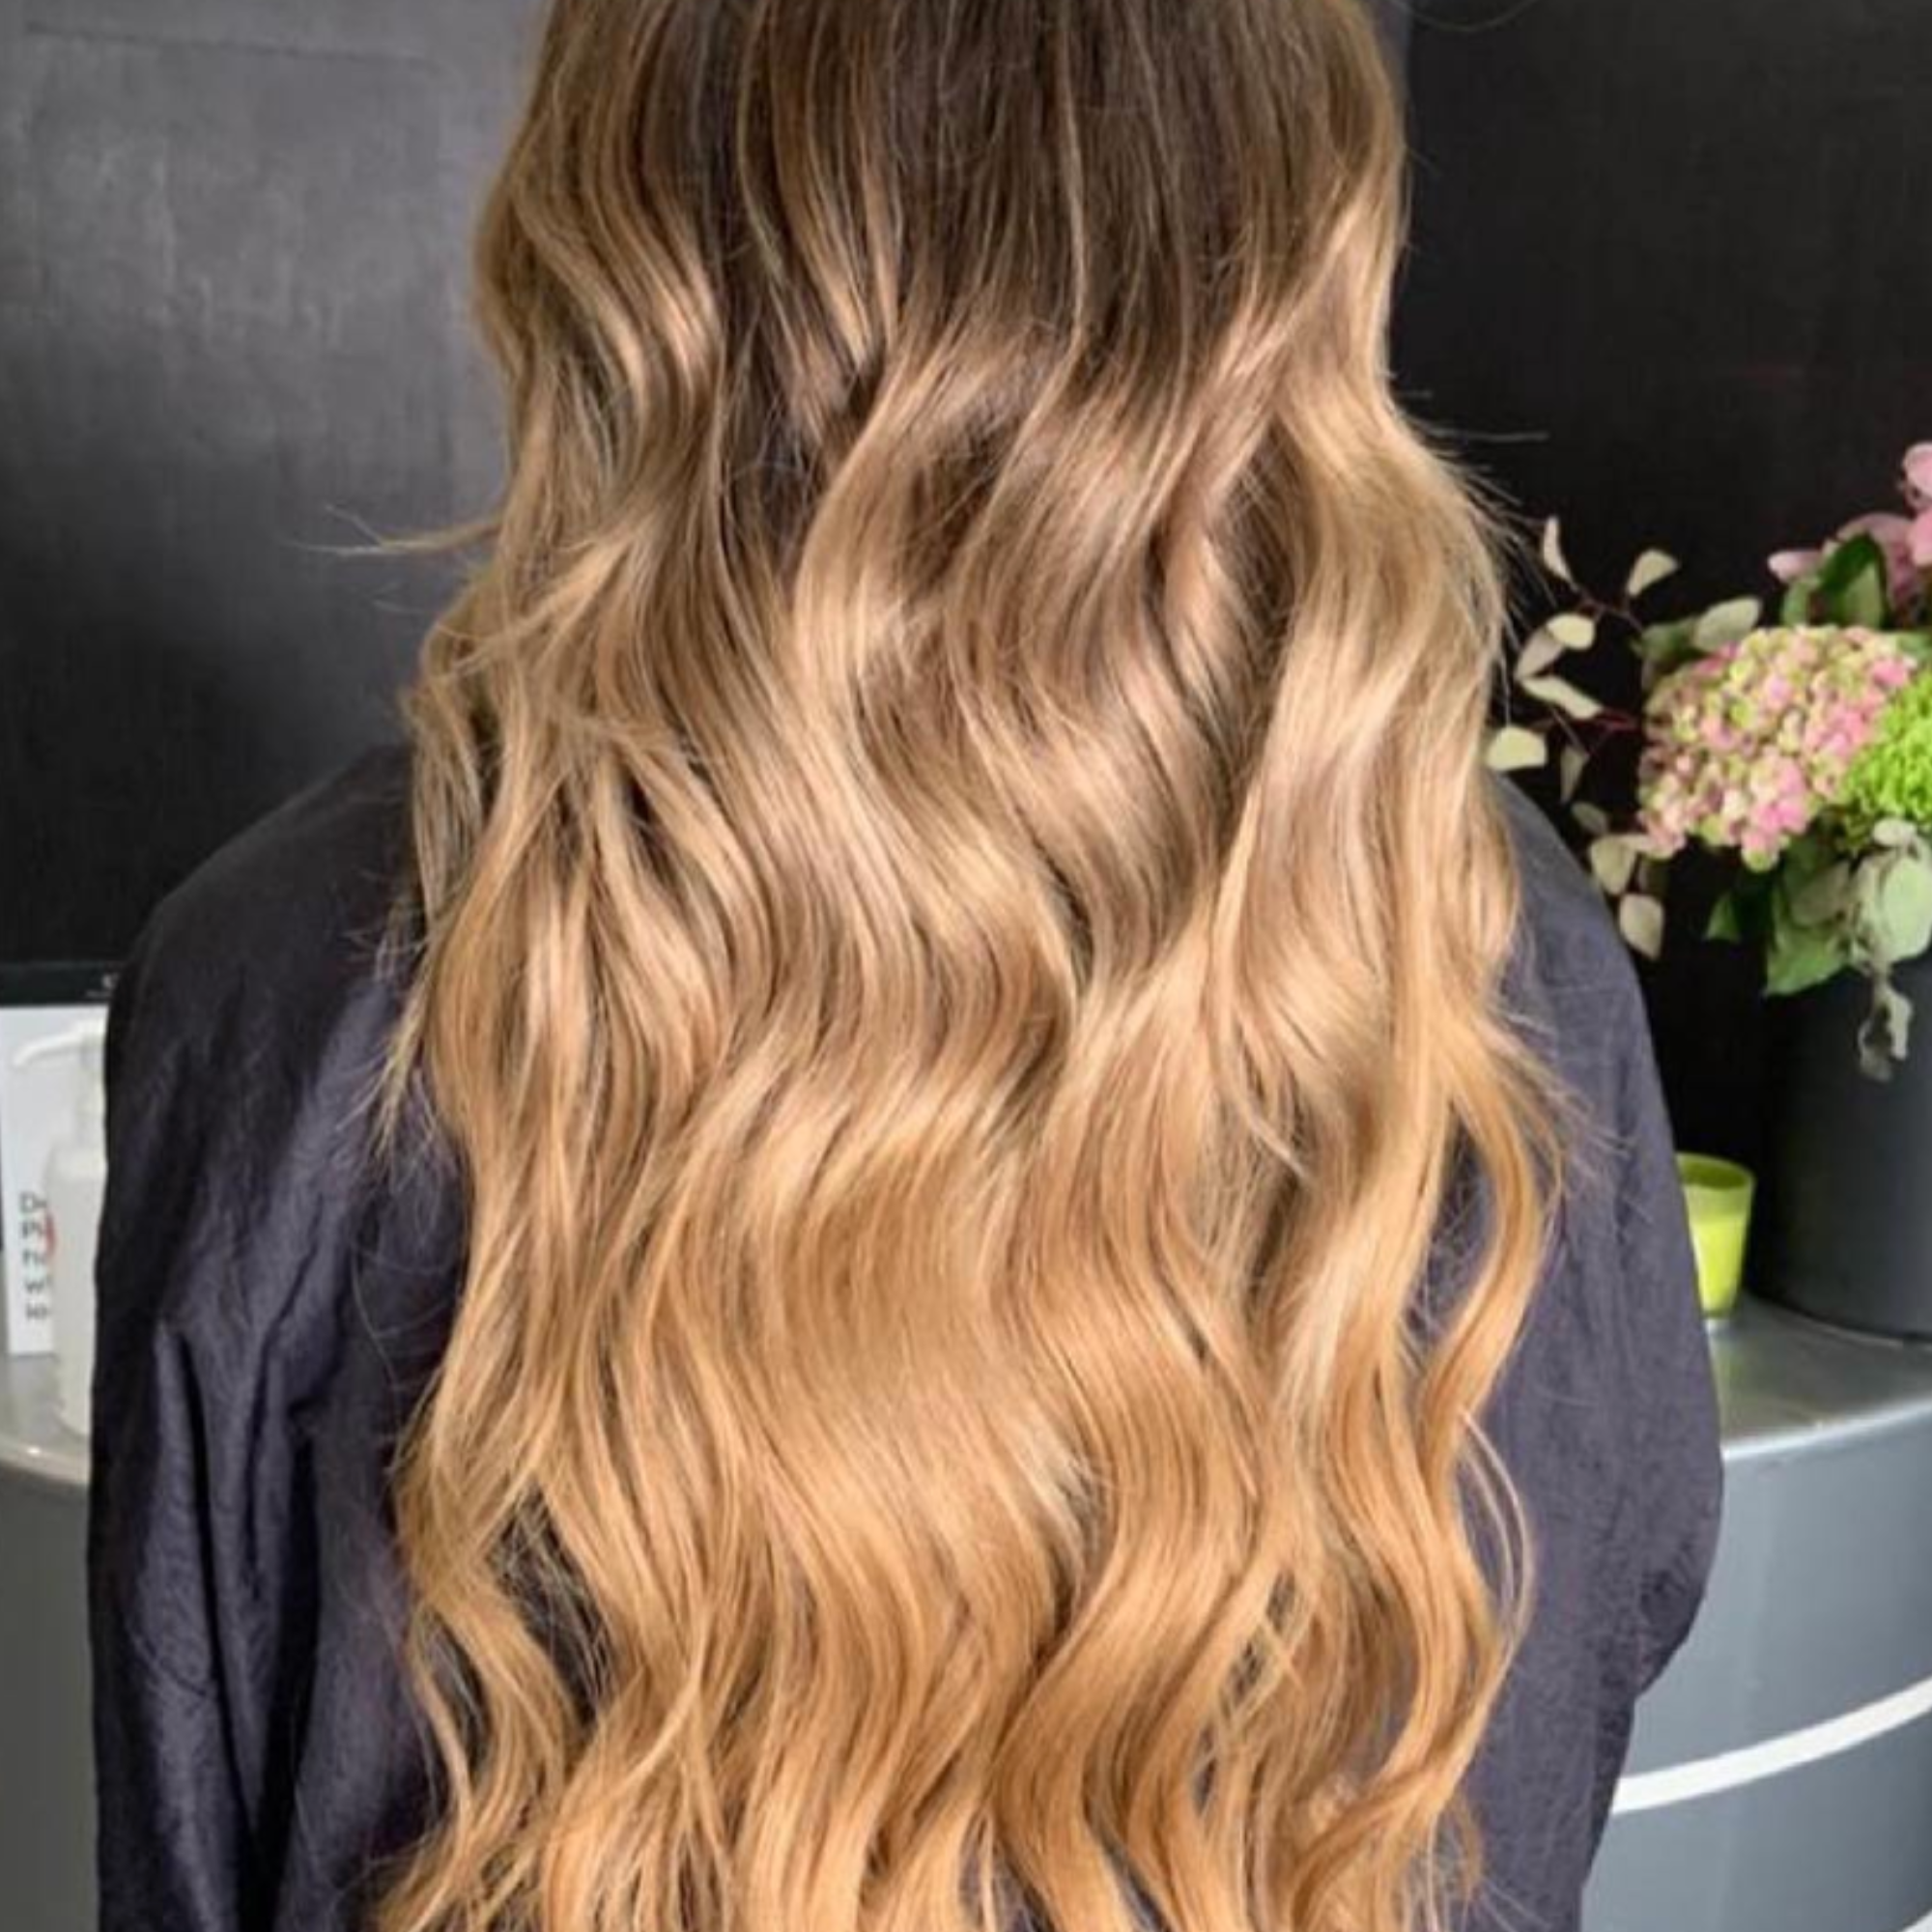 14" Stick Tip Extensions Rooted Boho